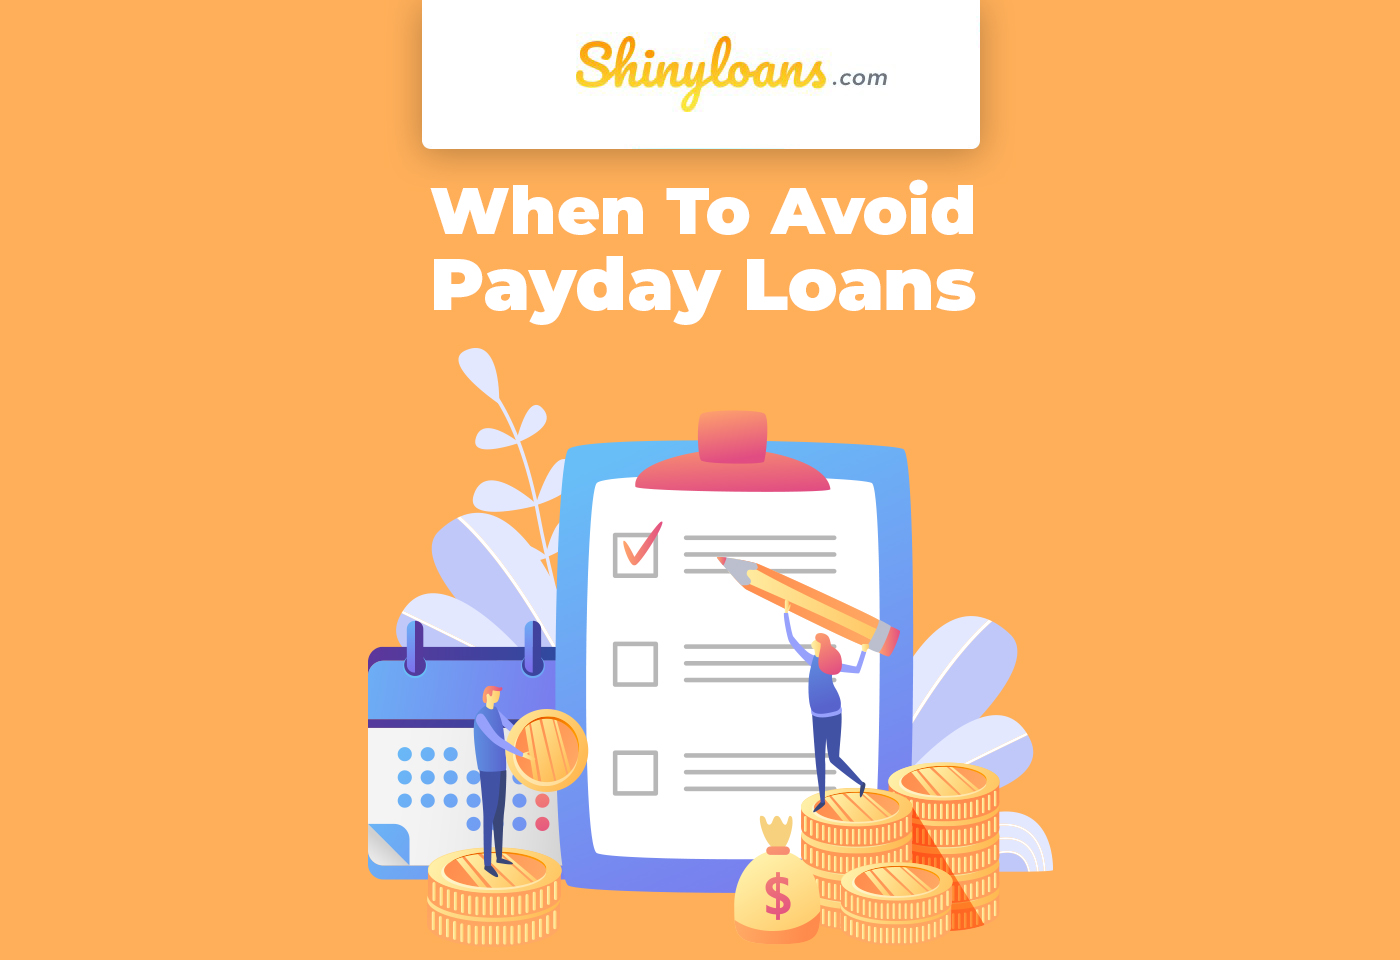 When To Avoid Payday Loans